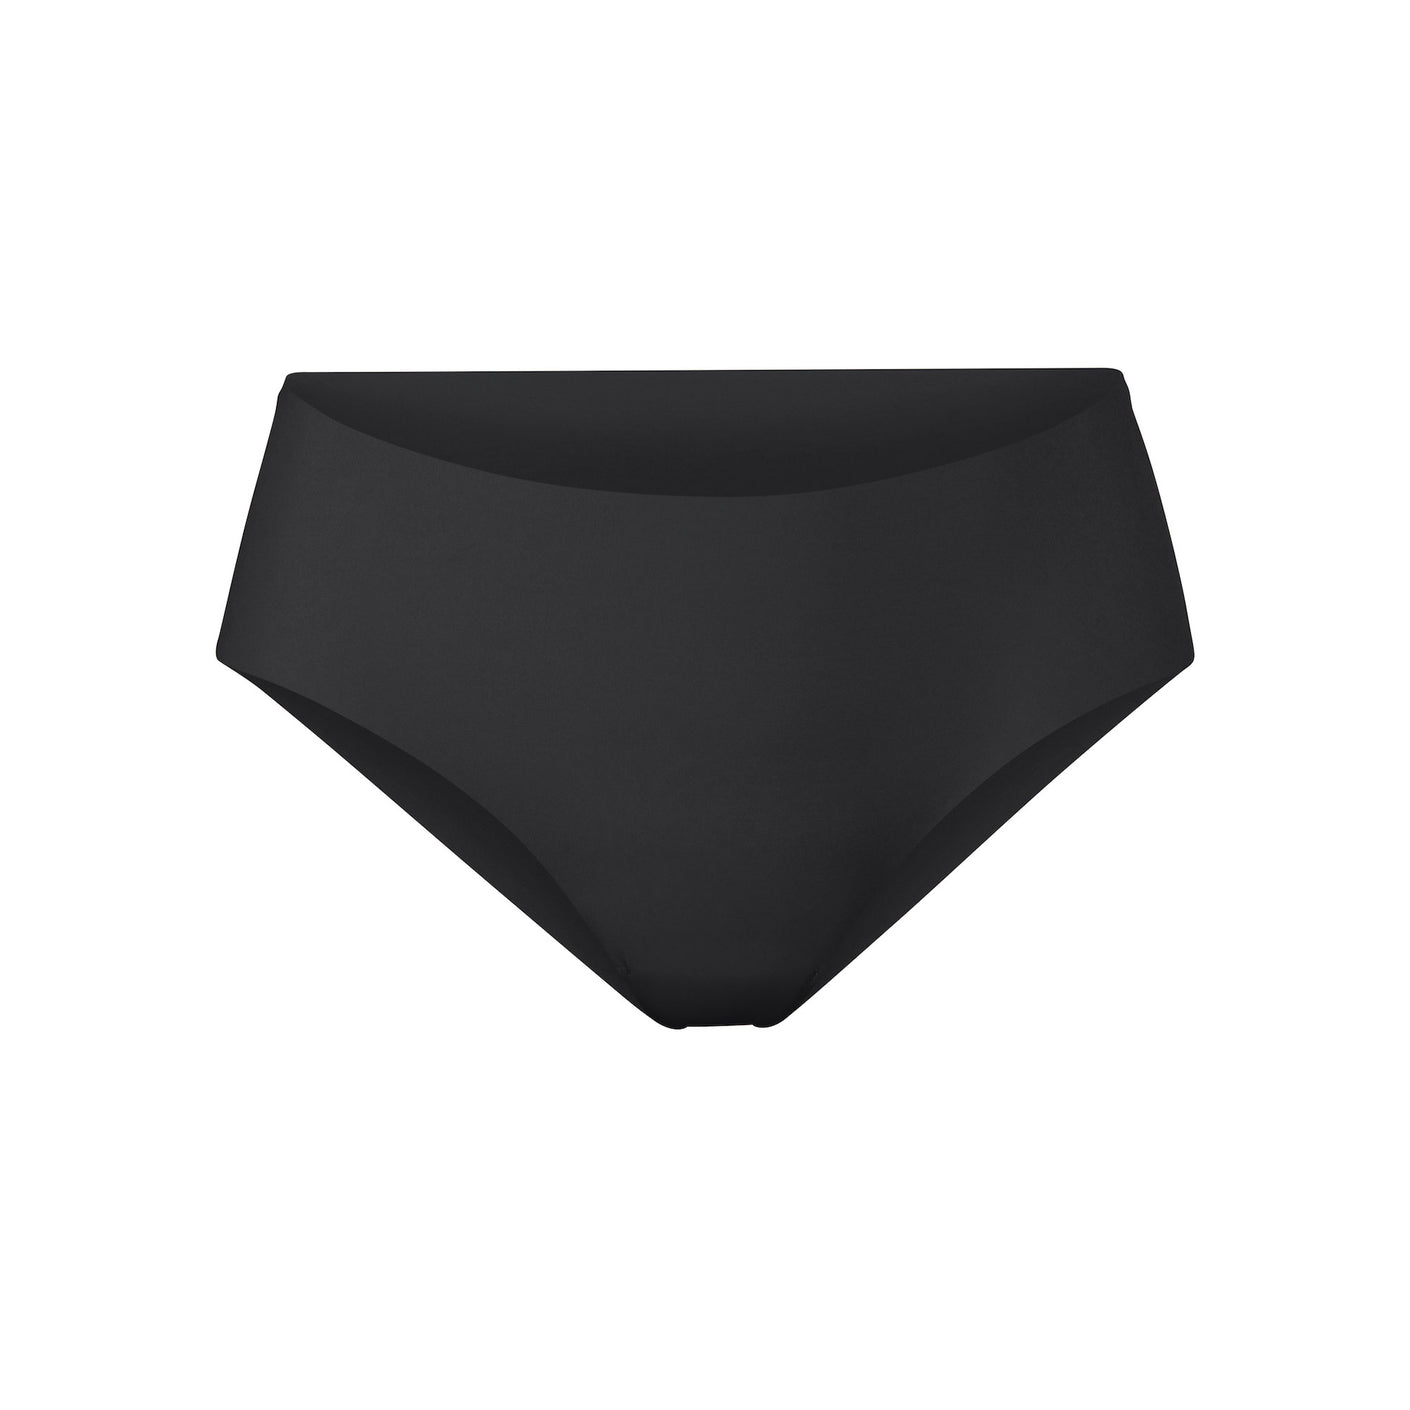 https://cdn.shopify.com/s/files/1/0259/5448/4284/products/SKIMS-PANTIES-PN-MWB-0872-ONX_bd3dfb19-456e-4f8b-acc3-7974107da06b.jpg?v=1640794254&width=1410&height=1410